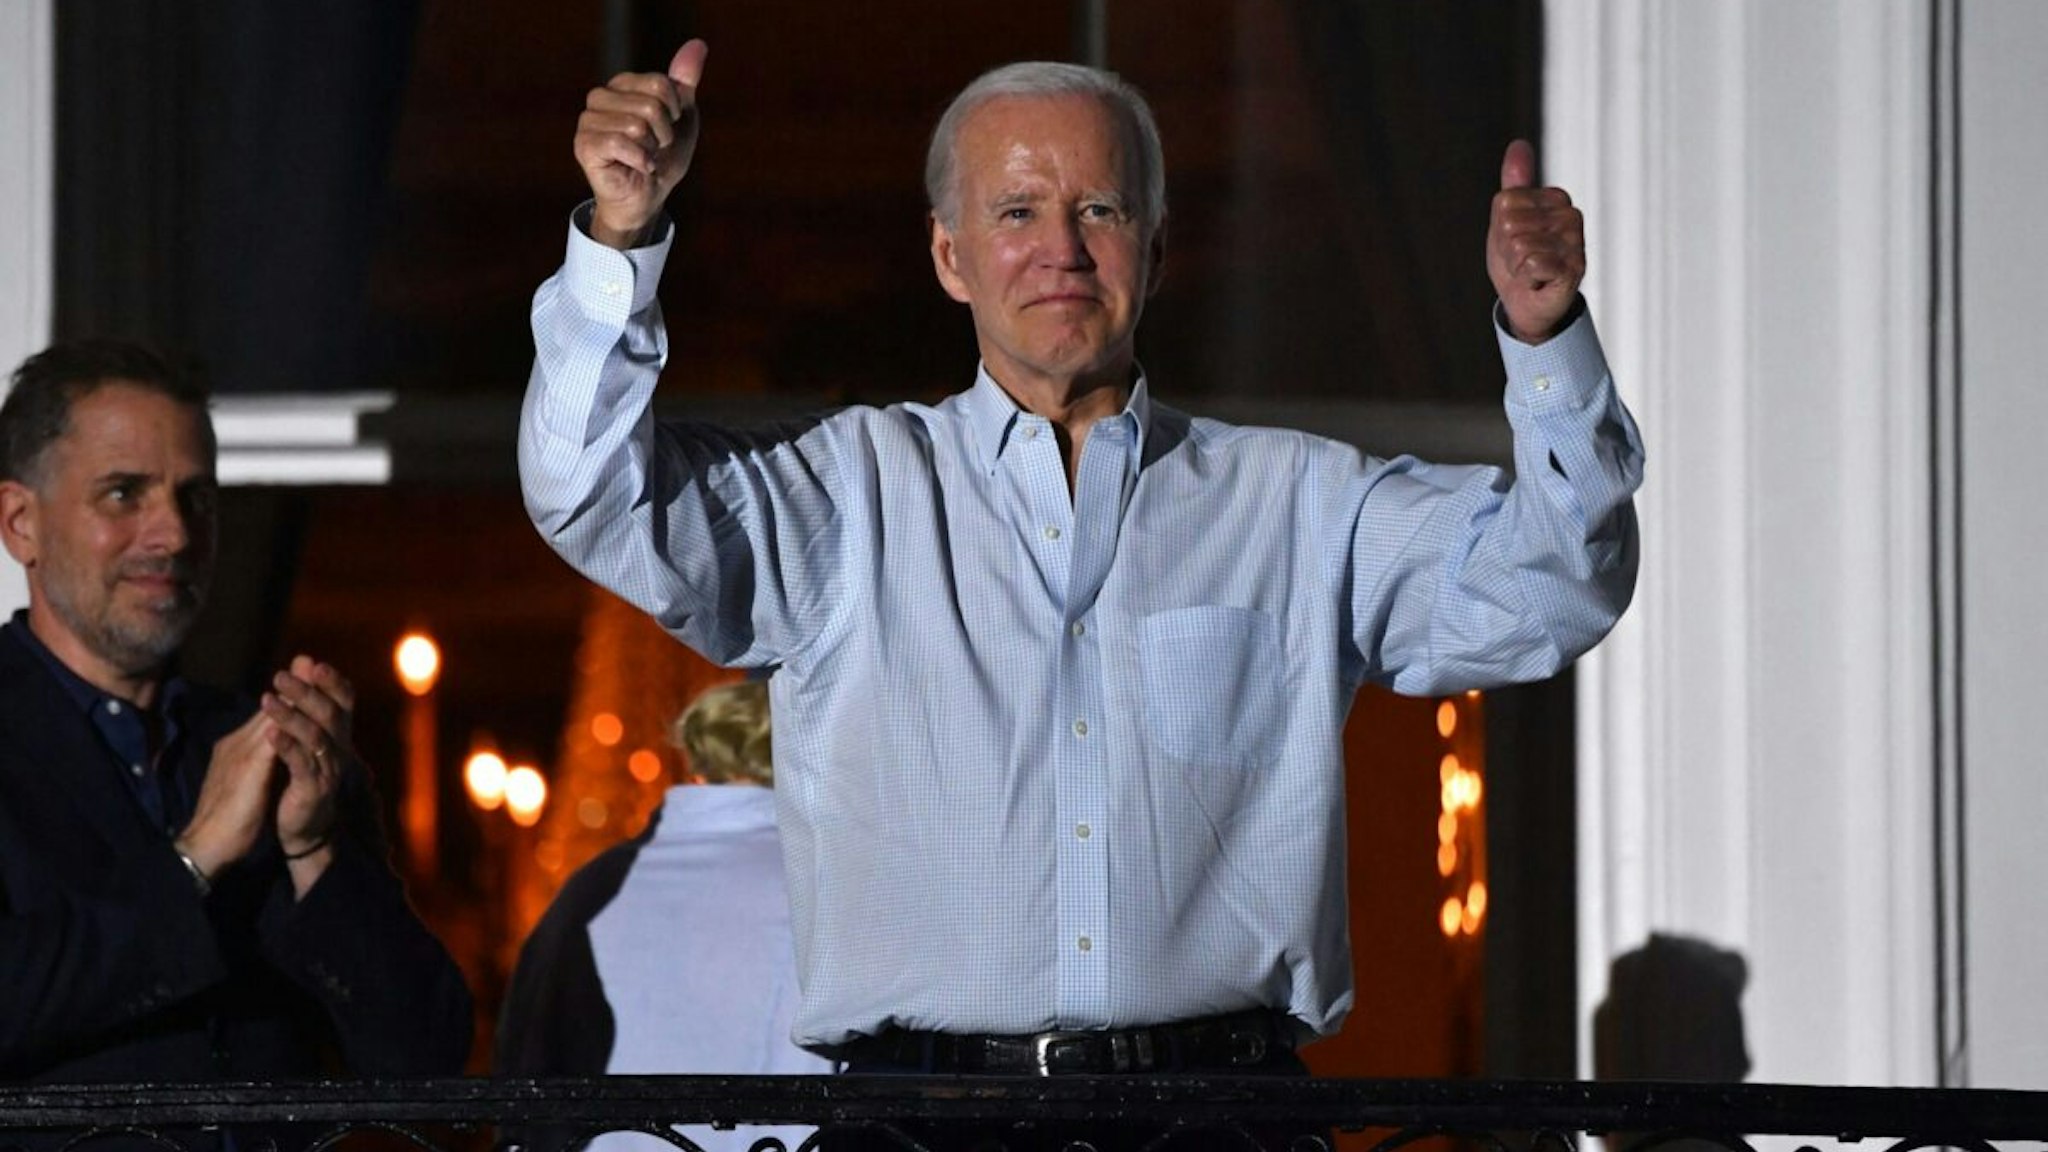 US President Joe Biden gives two thumbs up from a balcony of the White House as his son Hunter Biden (L) looks on during 4th of July fireworks in Washington, DC, July 4, 2022.